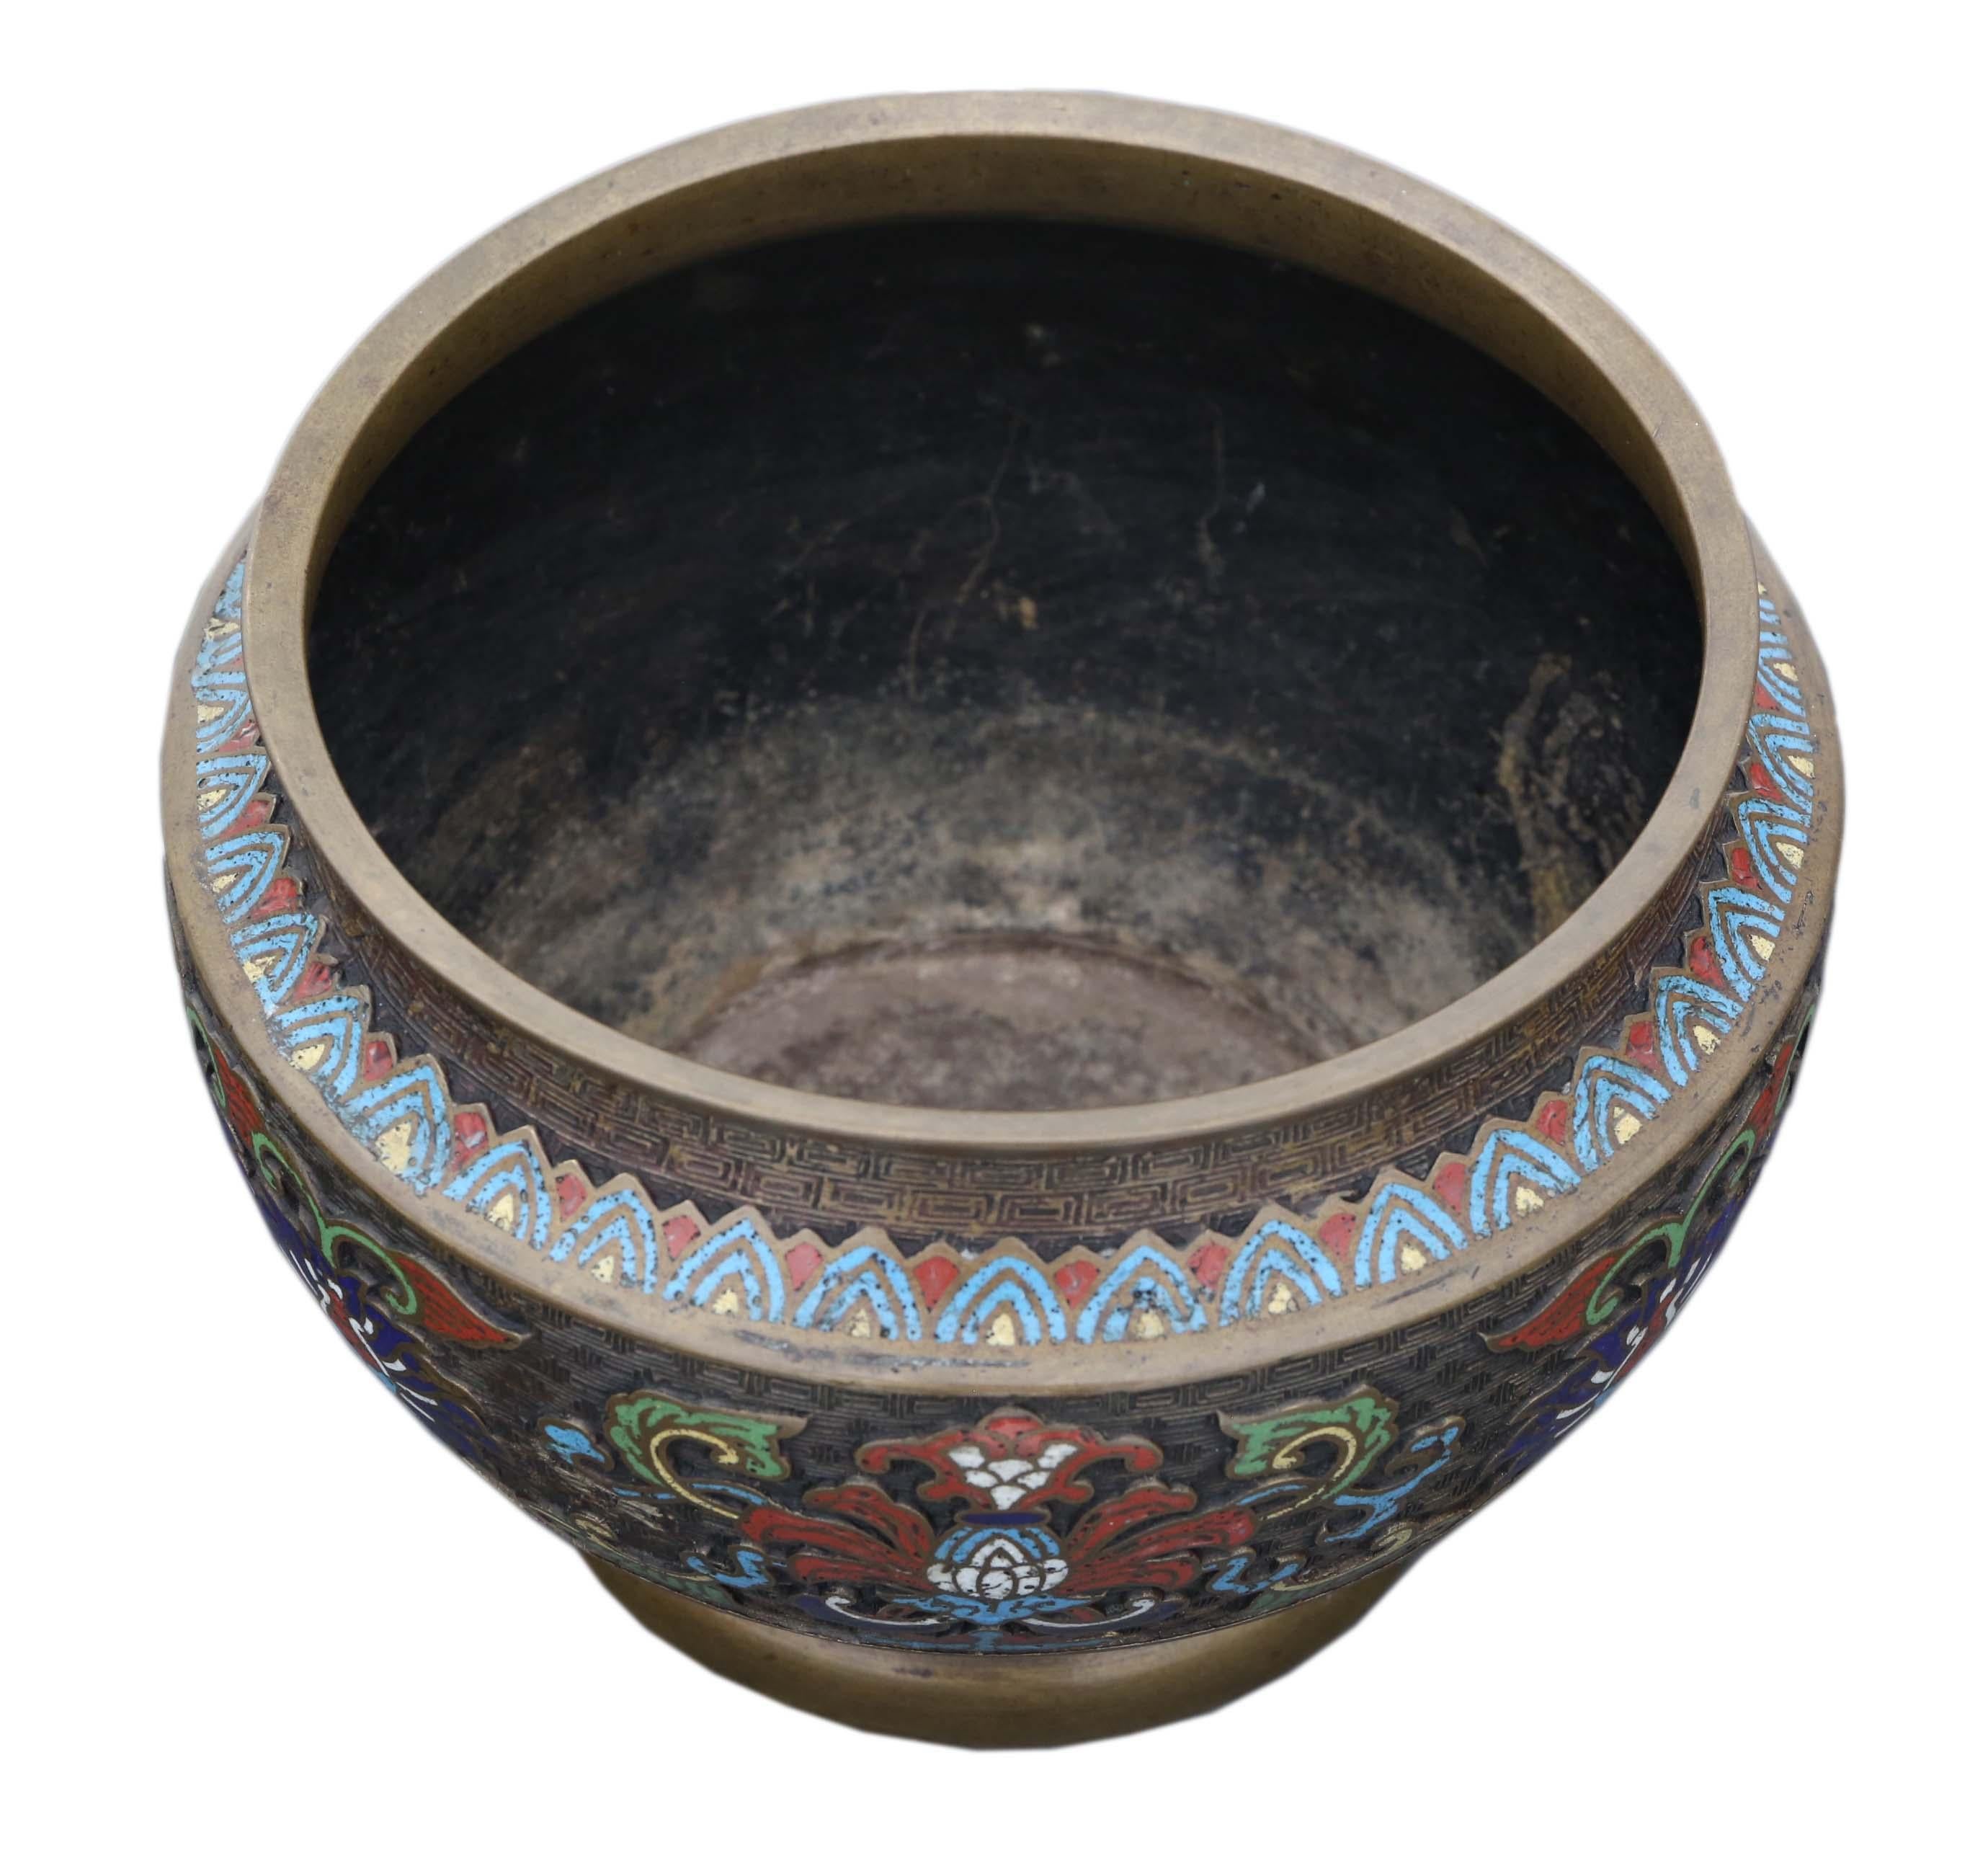 Antique Large Chinese Bronze Cloisonné Planter Bowl, Late 19th Century In Good Condition For Sale In Wisbech, Cambridgeshire